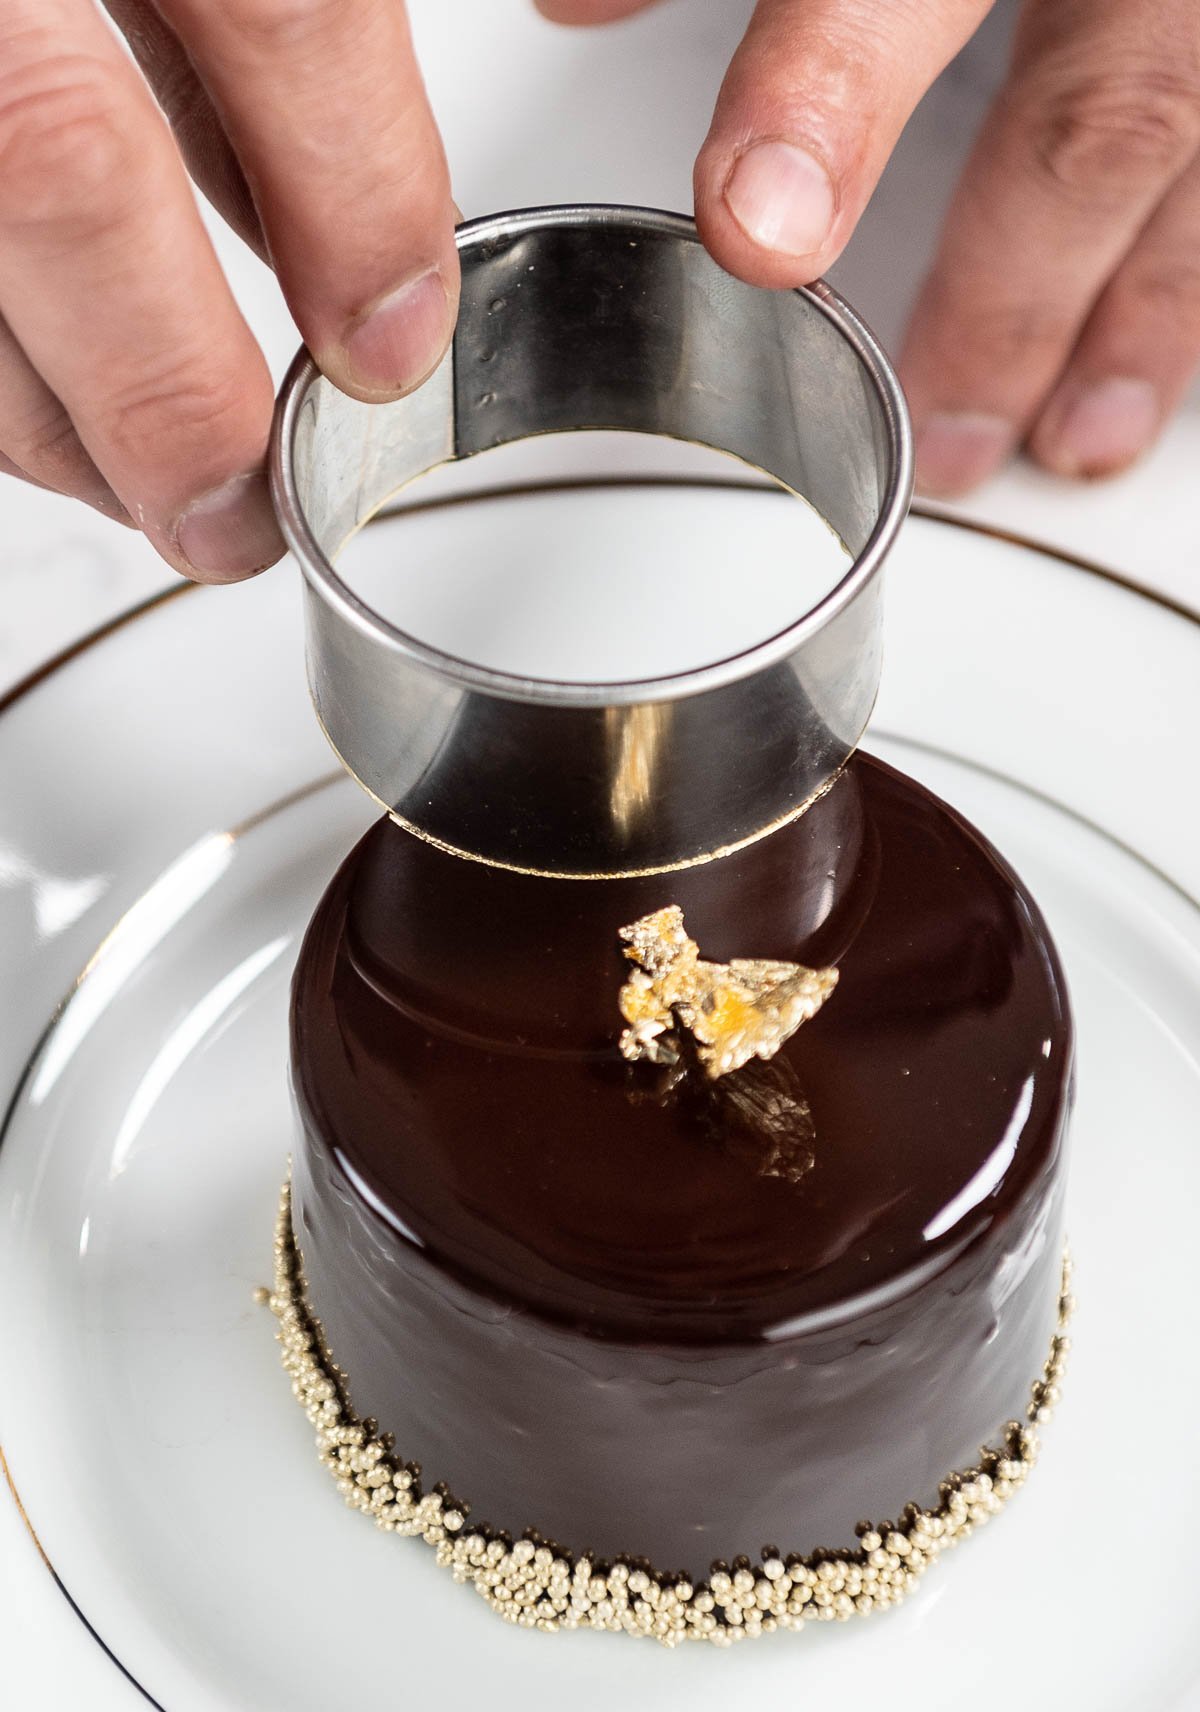 hand adding edible gold decorations to chocolate entremet